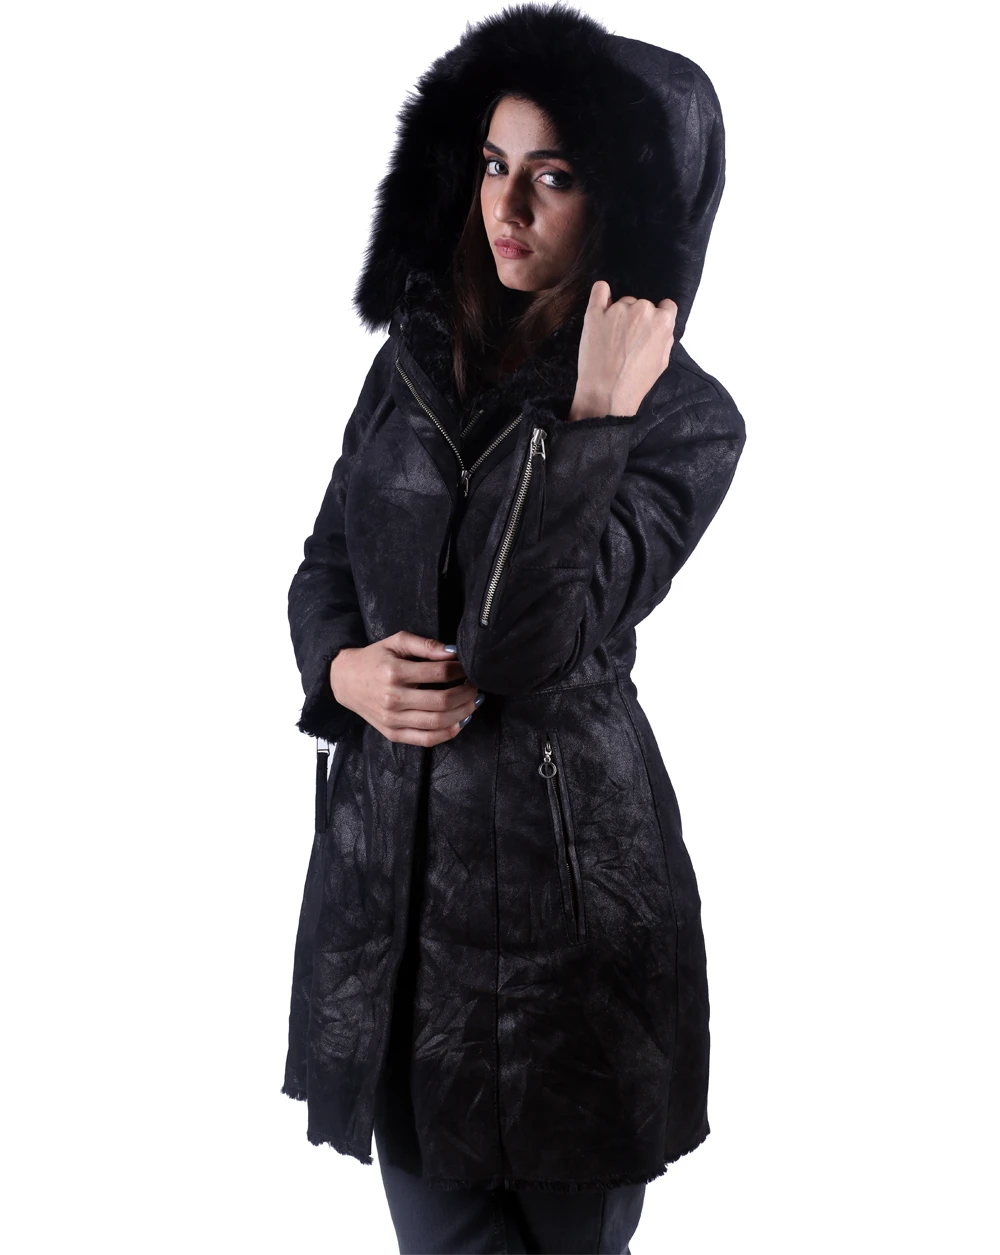 Melodic long leather hoodie coat 